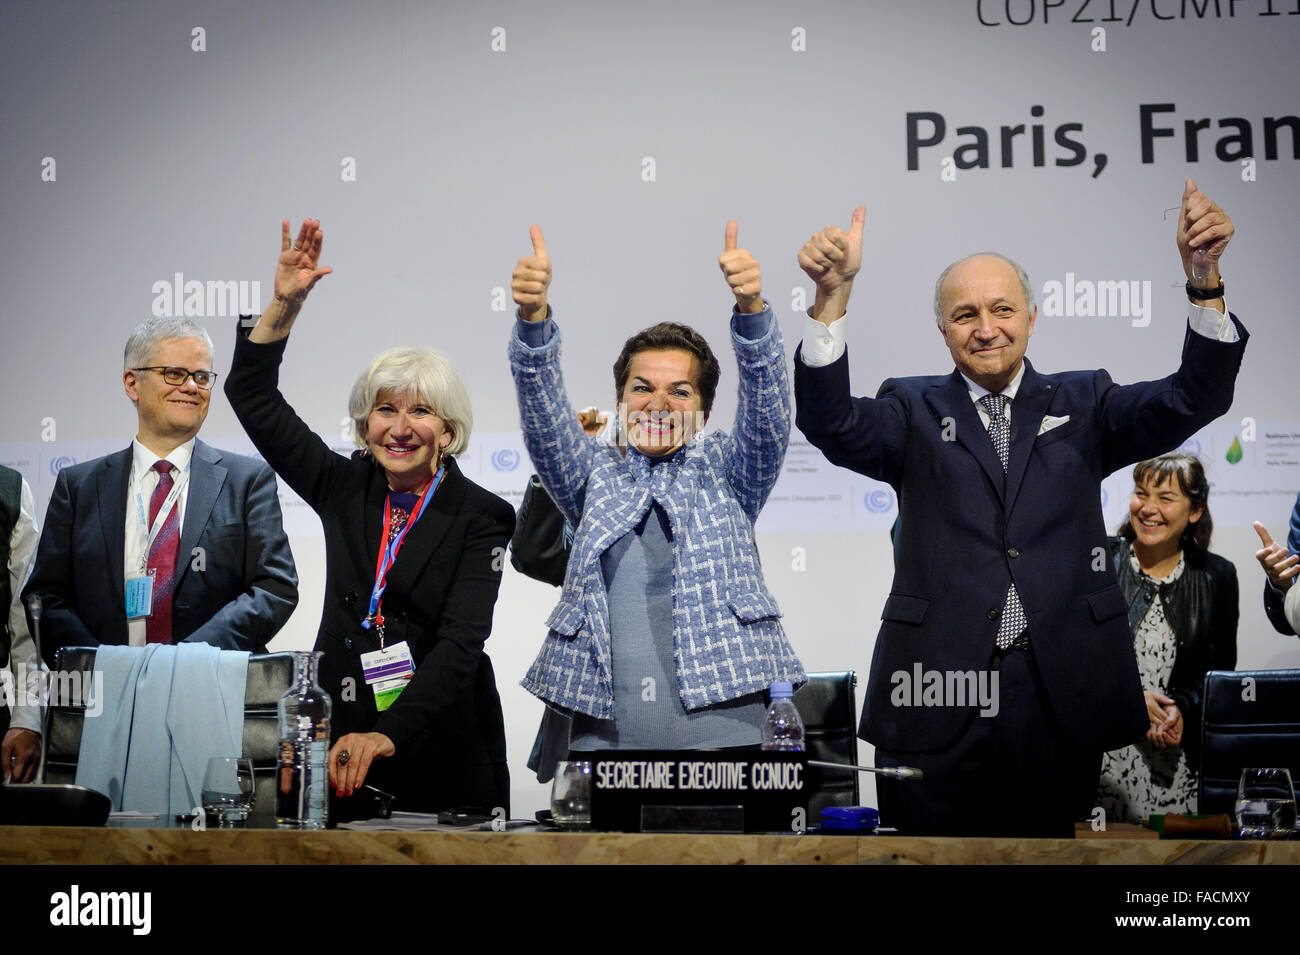 French Foreign Minister Laurent Fabius  right, joins United Nations climate chief Christiana Figuere, center, and Laurence Tubiana celebrating the agreement on climate change at the conclusion of the COP21, United Nations Climate Change Conference December 12, 2015 in Le Bourget, France. Stock Photo